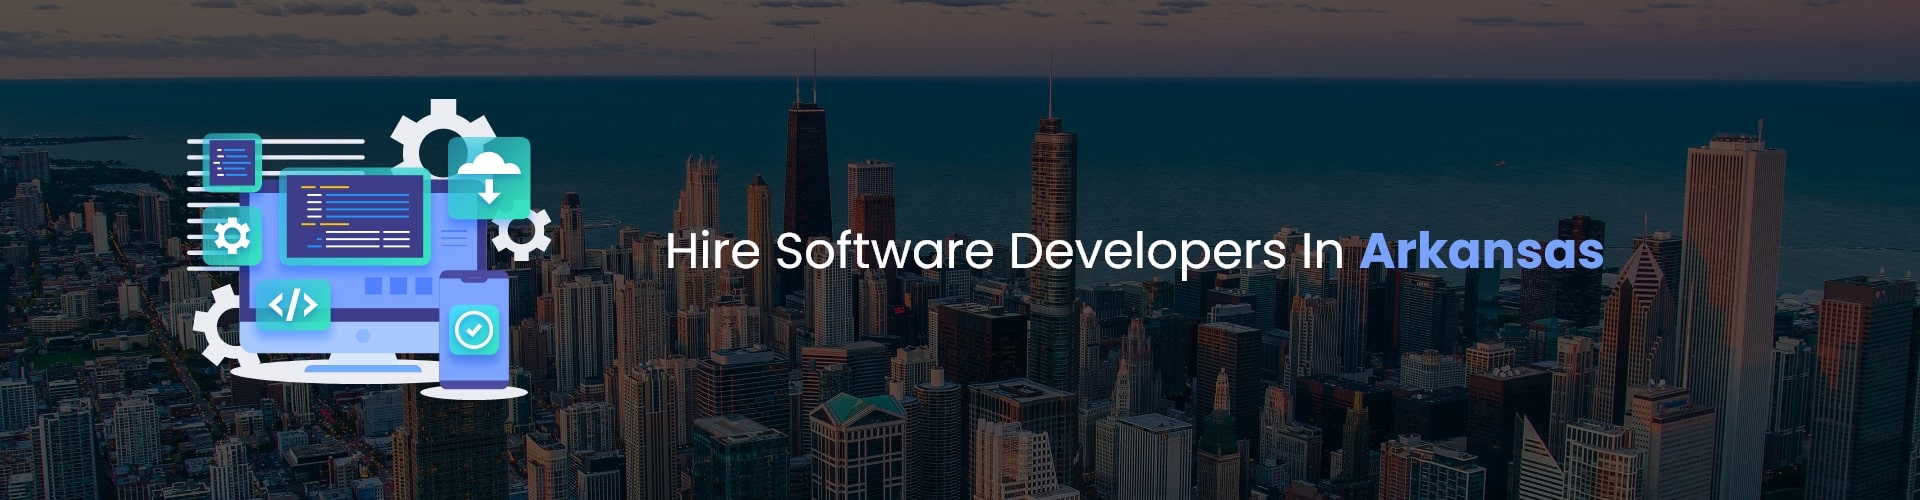 hire software developers in arkansas